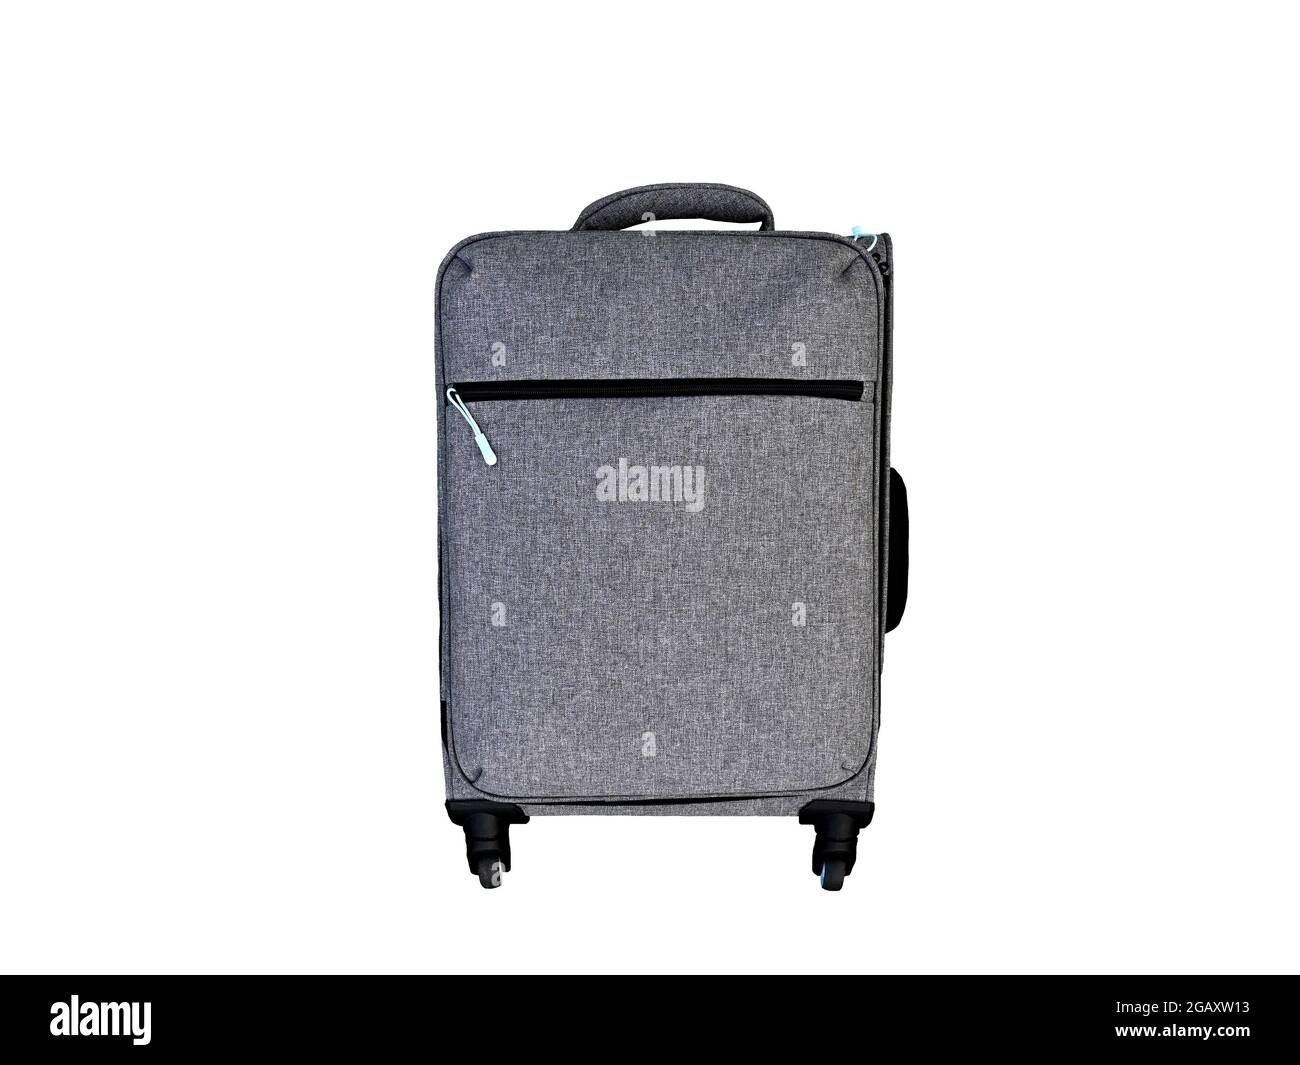 Small grey suitcase isolated on a plain white background. No people. Copy space. Stock Photo